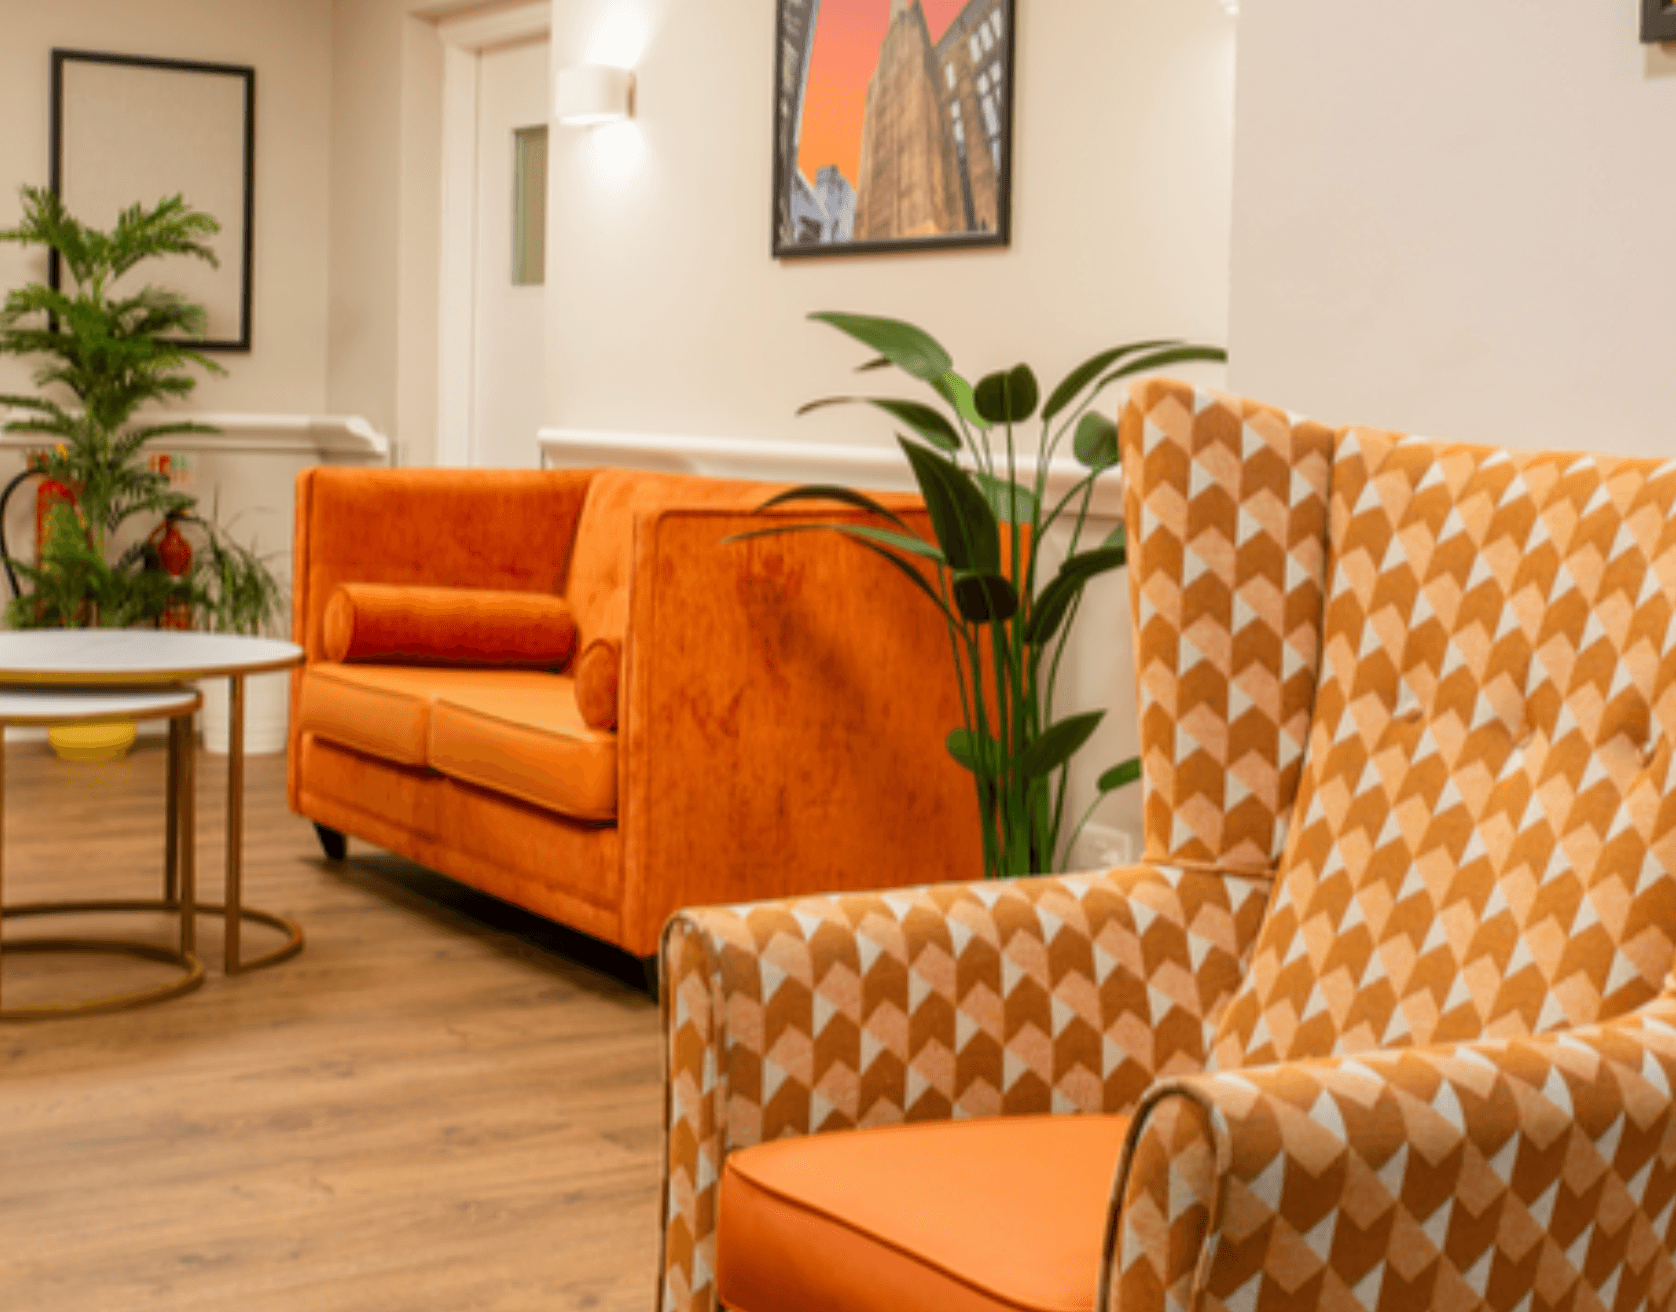 Lounge of Haverlock Court care home in Stockwell, London